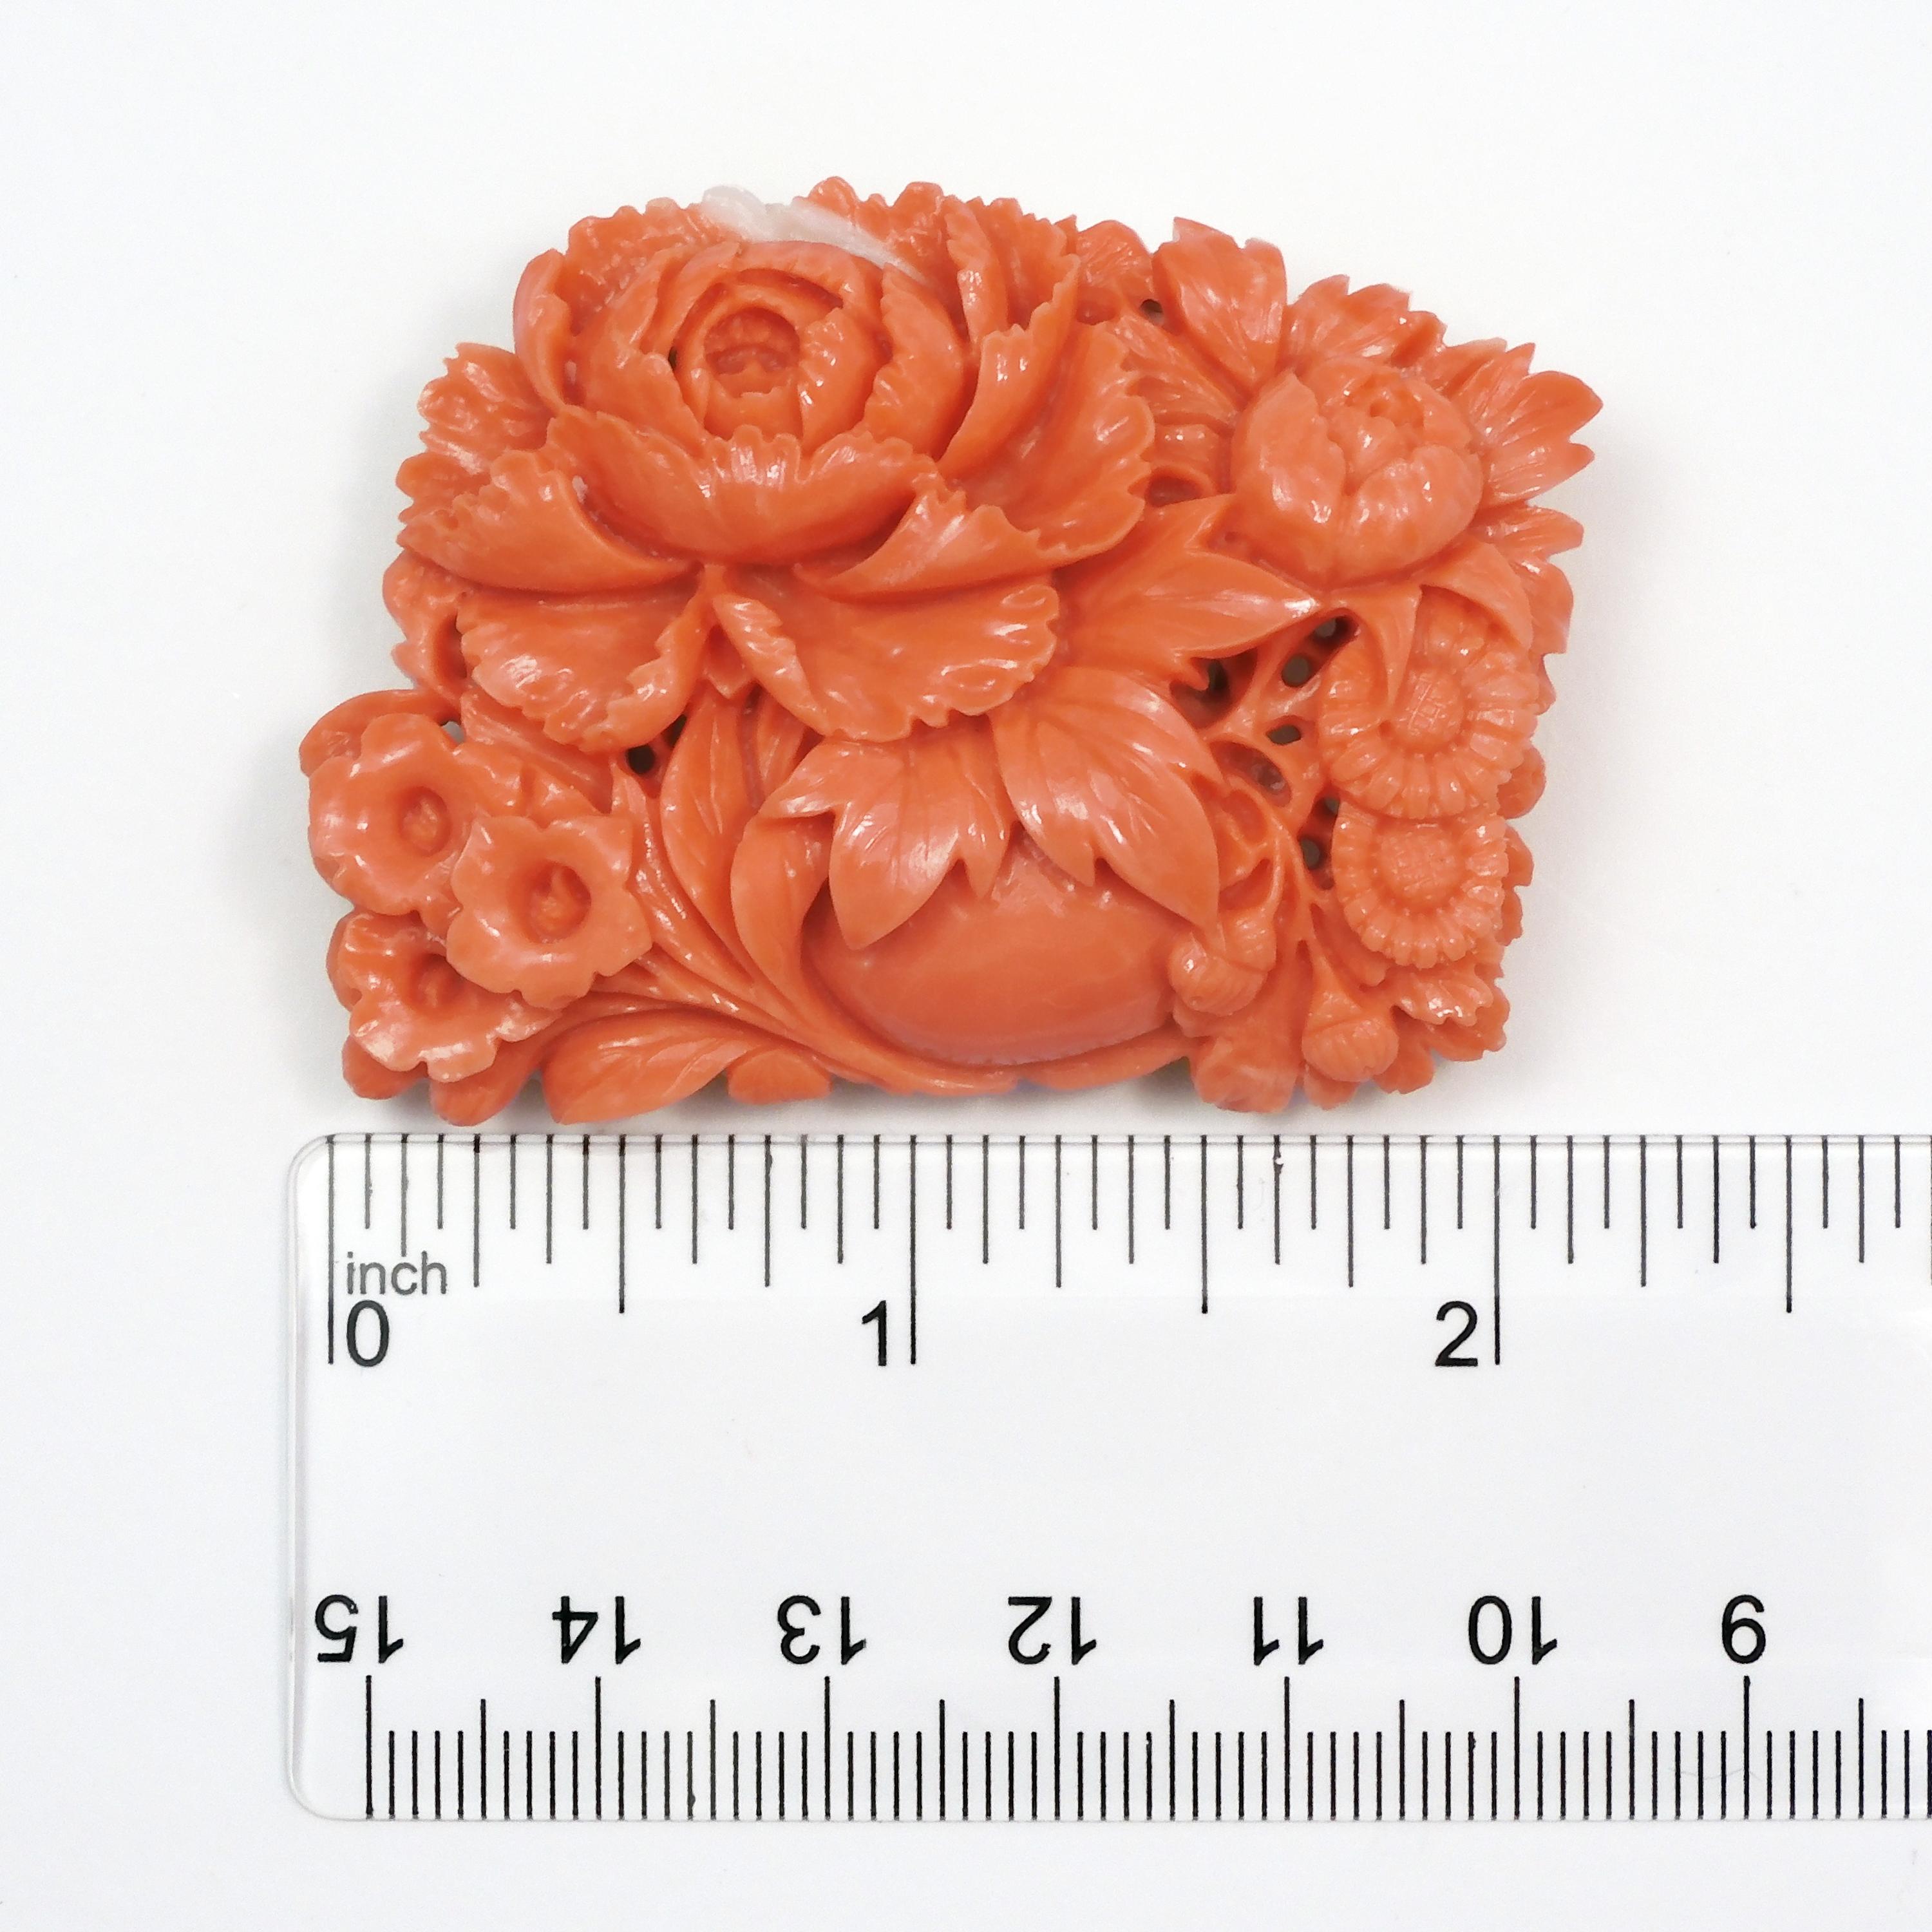 18 Karat Yellow Gold Carved Flower Brooch Crafted with Momoiro Sango Coral For Sale 6